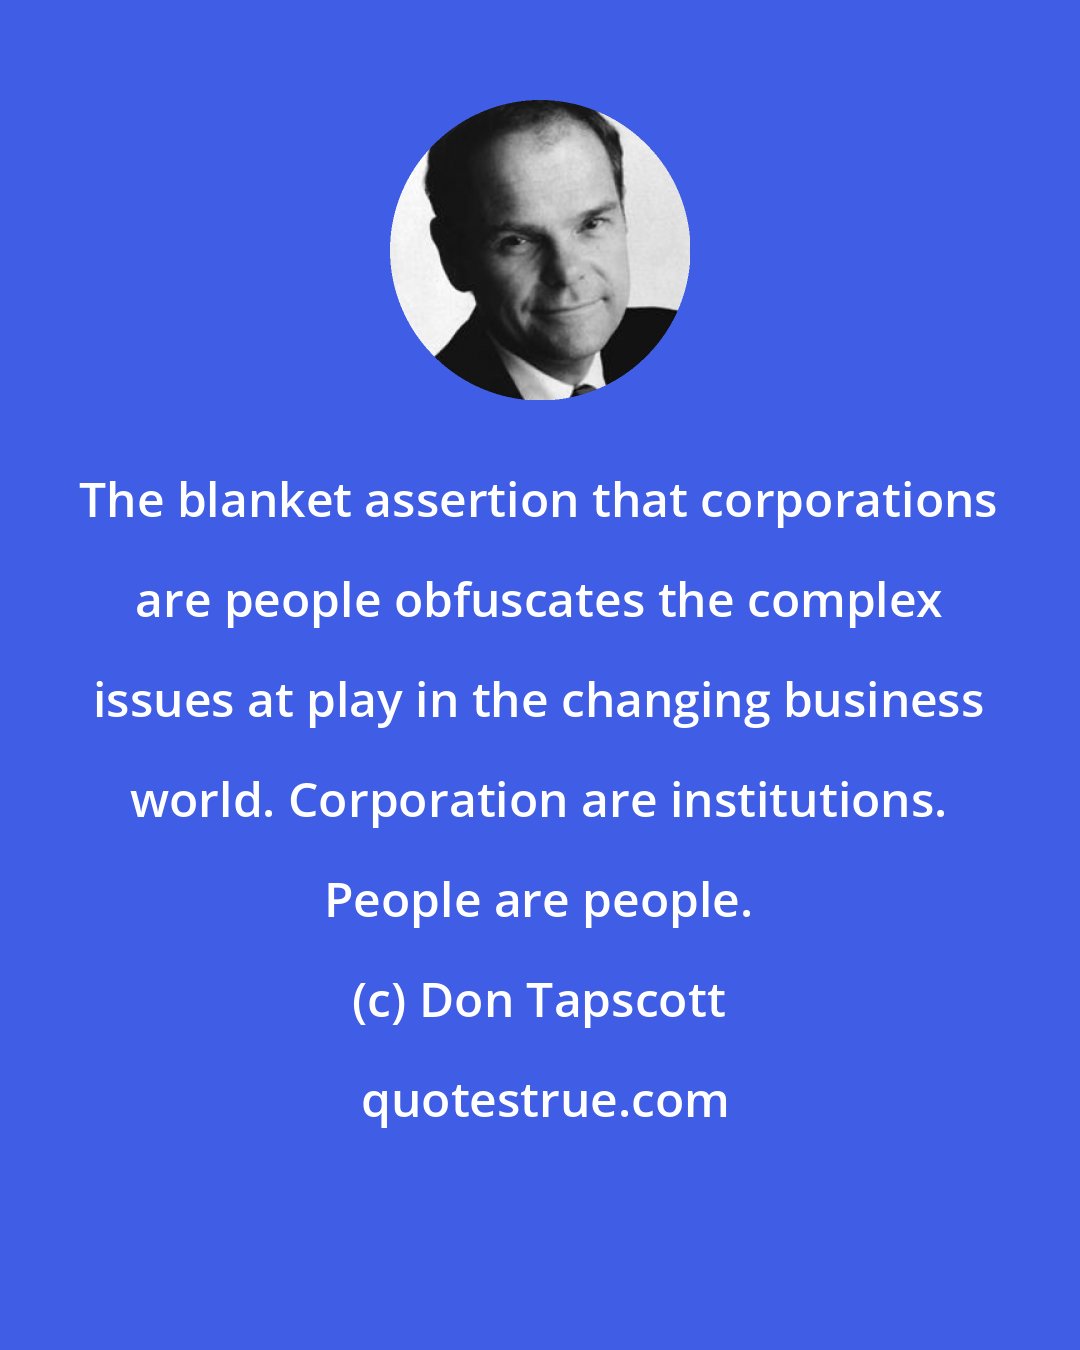 Don Tapscott: The blanket assertion that corporations are people obfuscates the complex issues at play in the changing business world. Corporation are institutions. People are people.